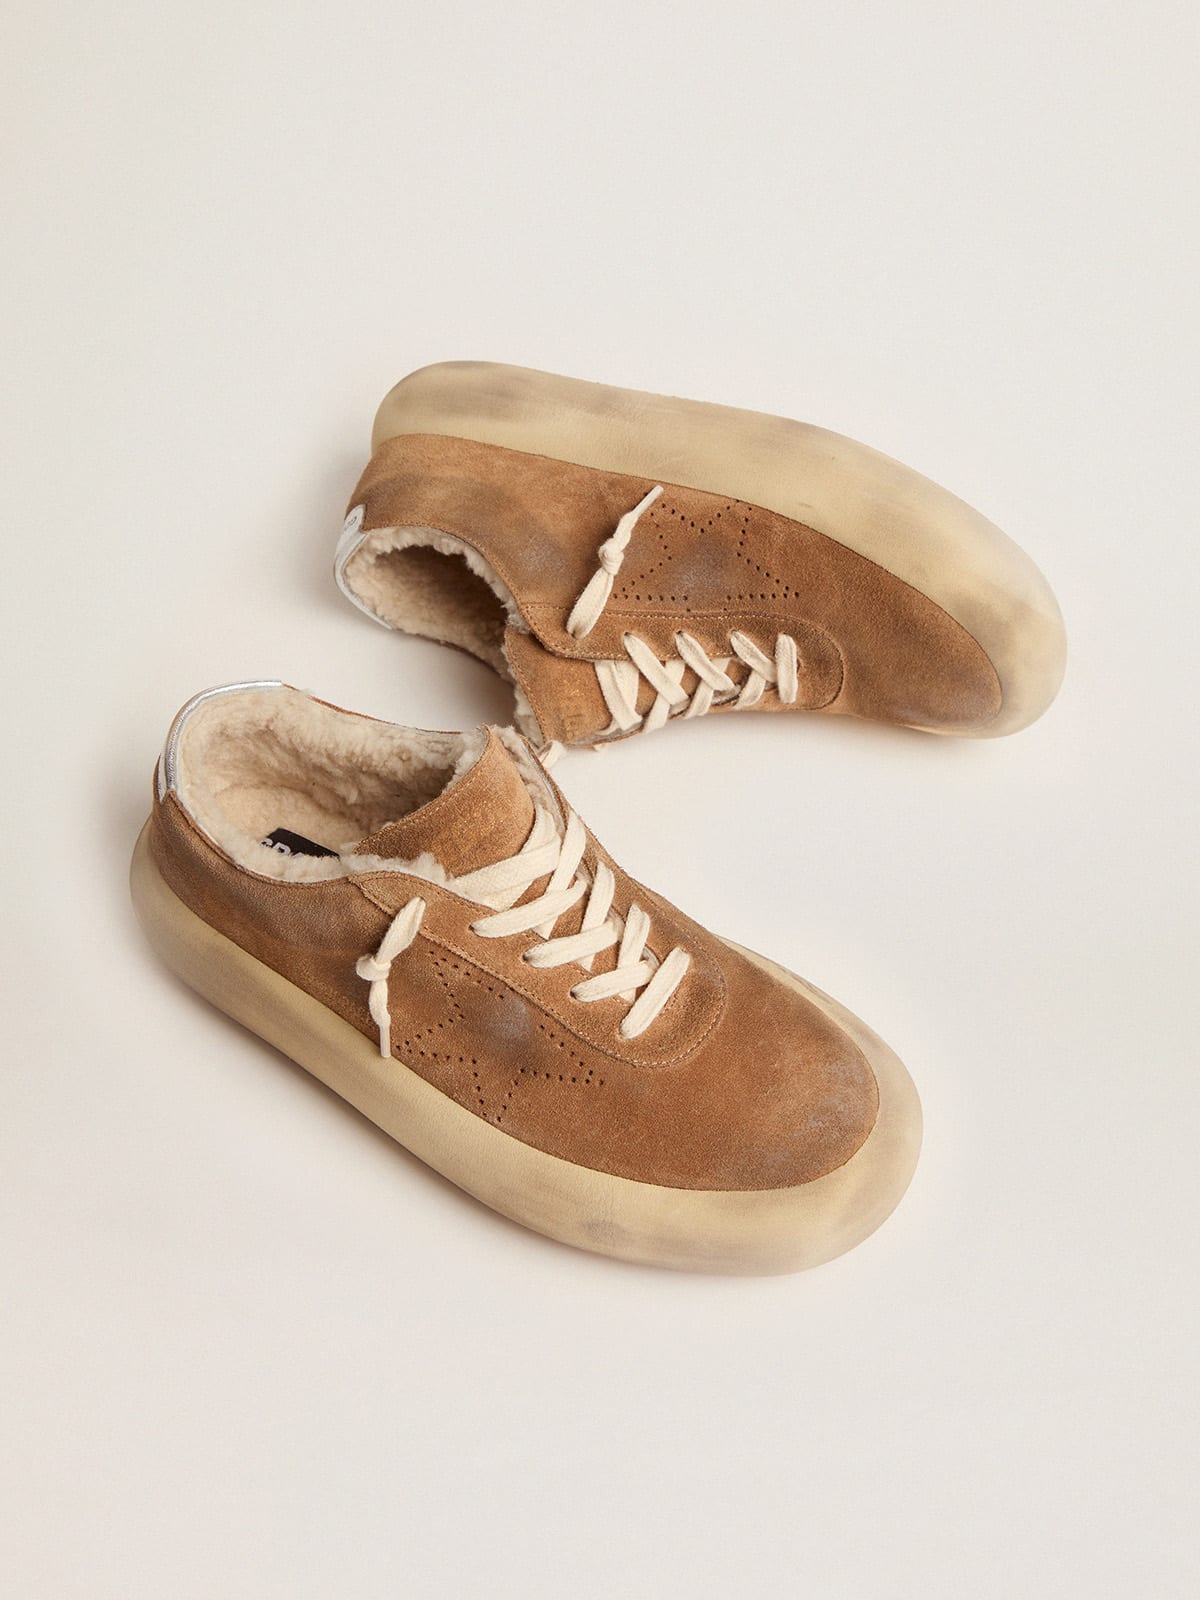 Golden Goose - Scarpe Space-Star Donna in suede color tabacco e fodera in shearling in 